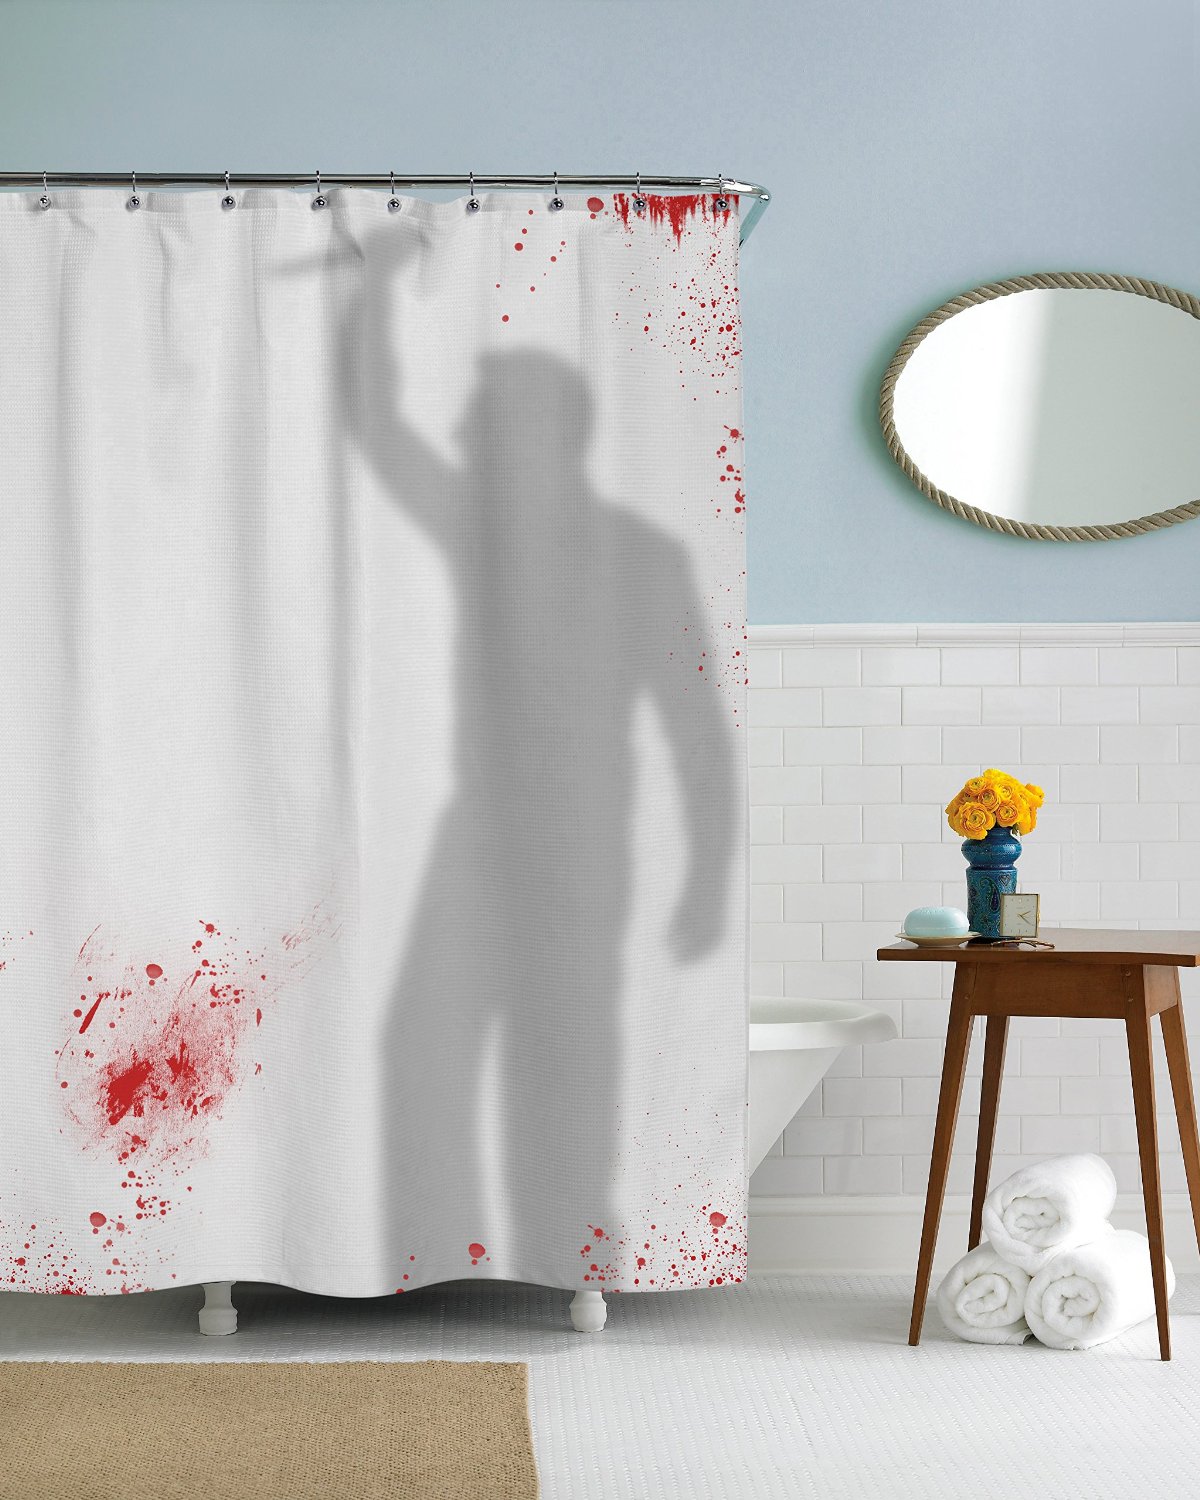 21 Horror Inspired Shower Curtains To, Scary Shower Curtain Scene